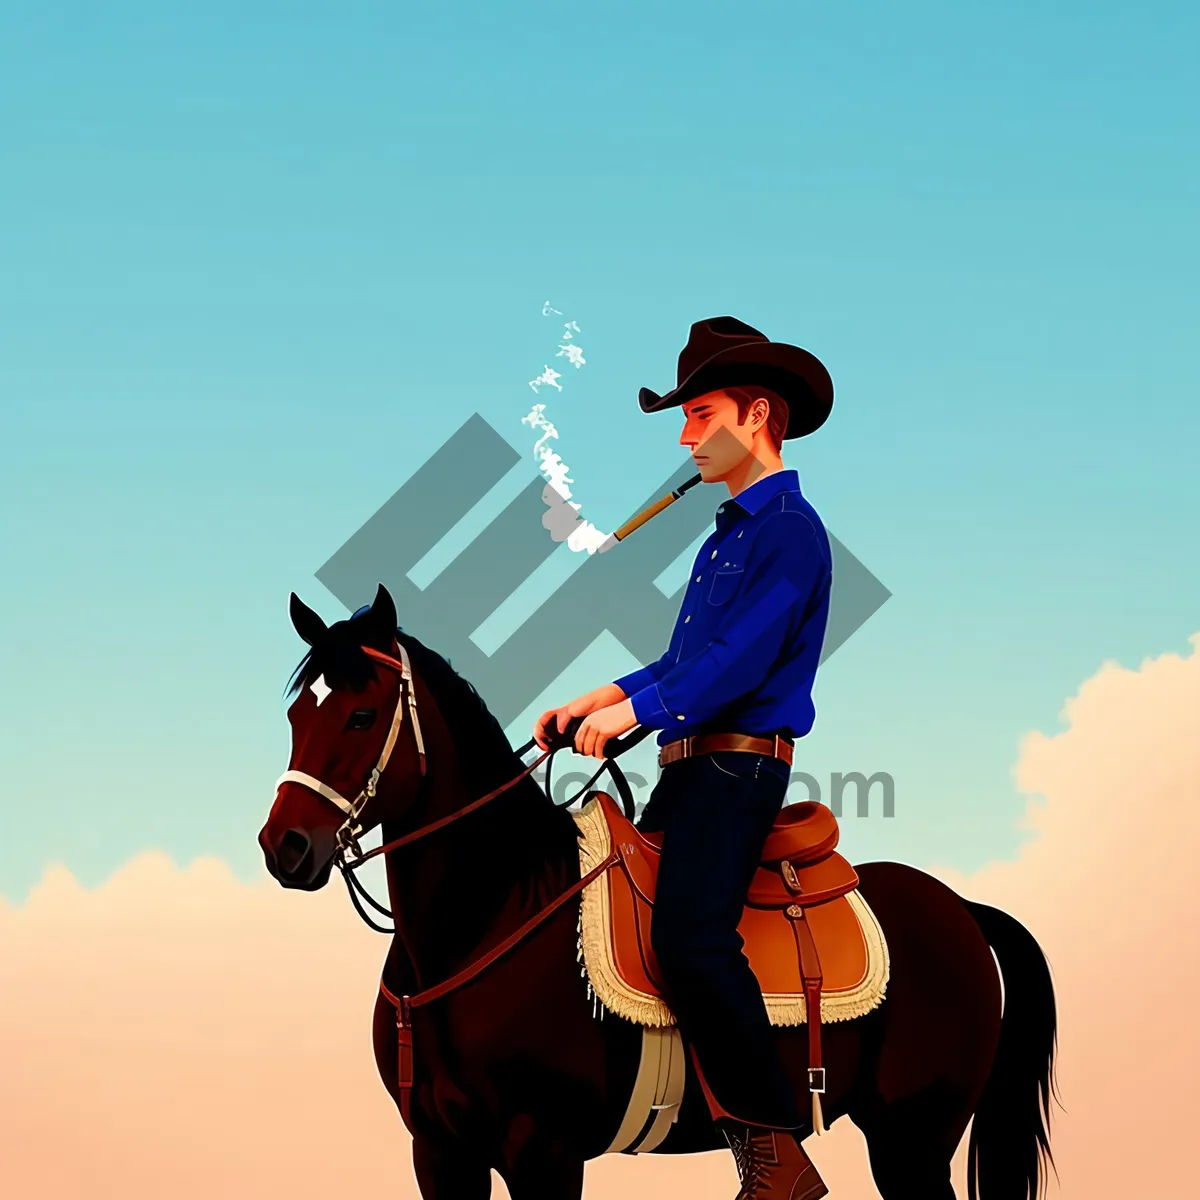 Picture of Silhouette of Horseback Rider in Equestrian Sport